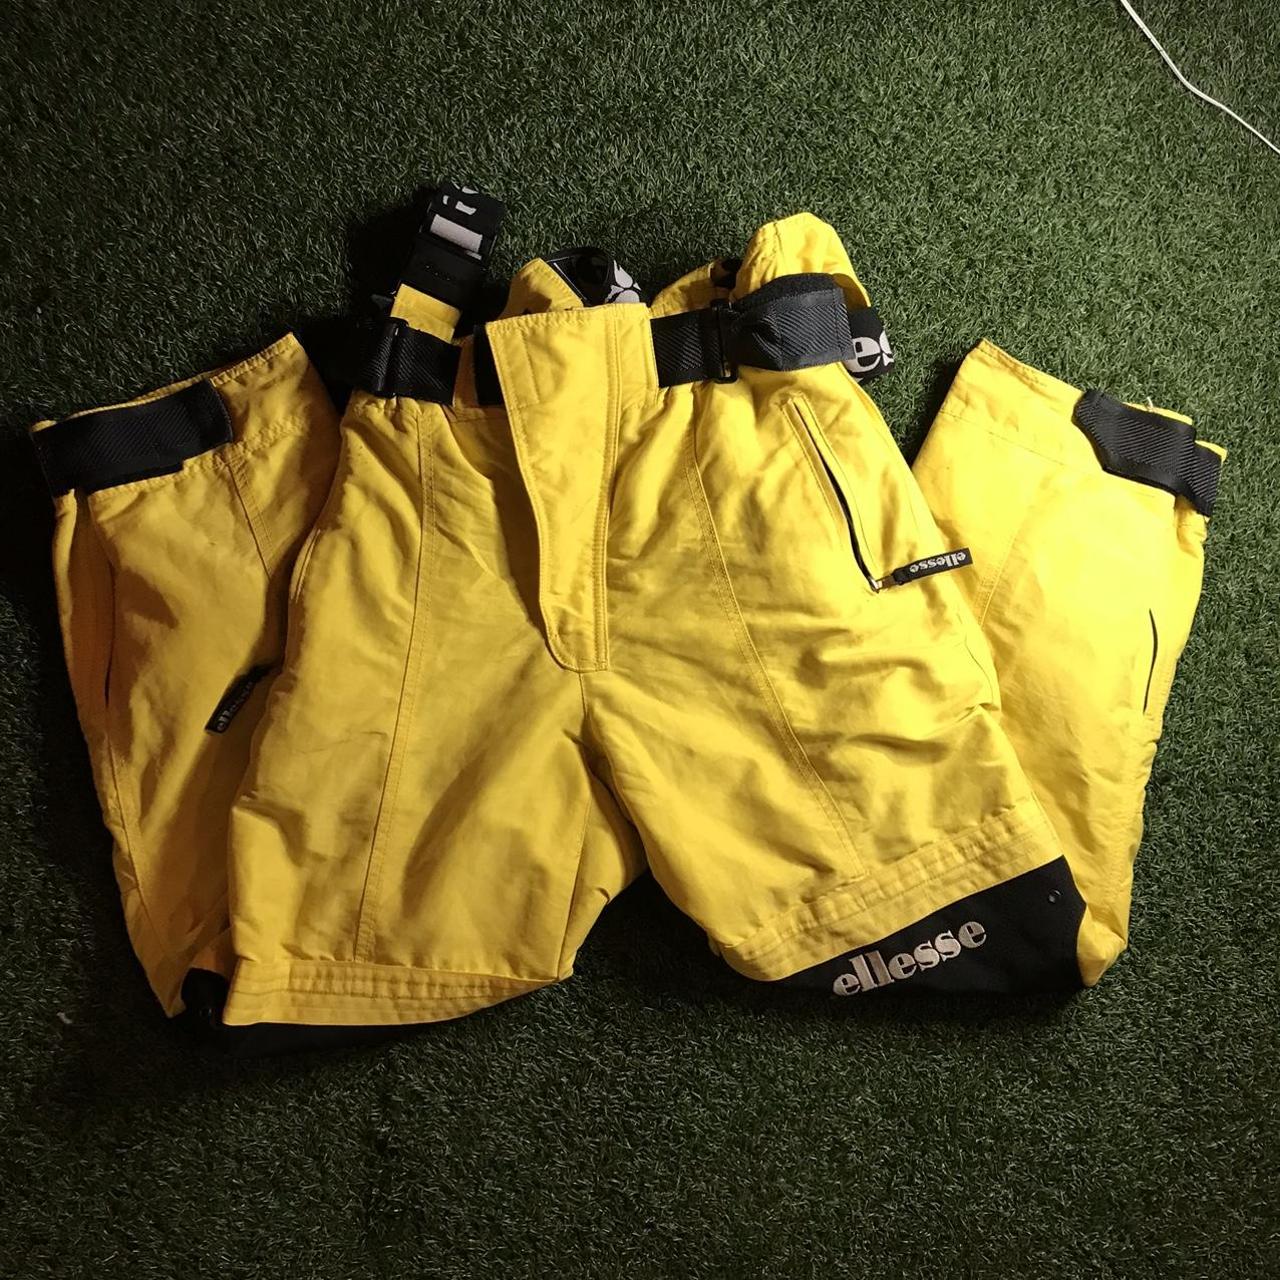 Ellesse Men's Yellow and Black Trousers